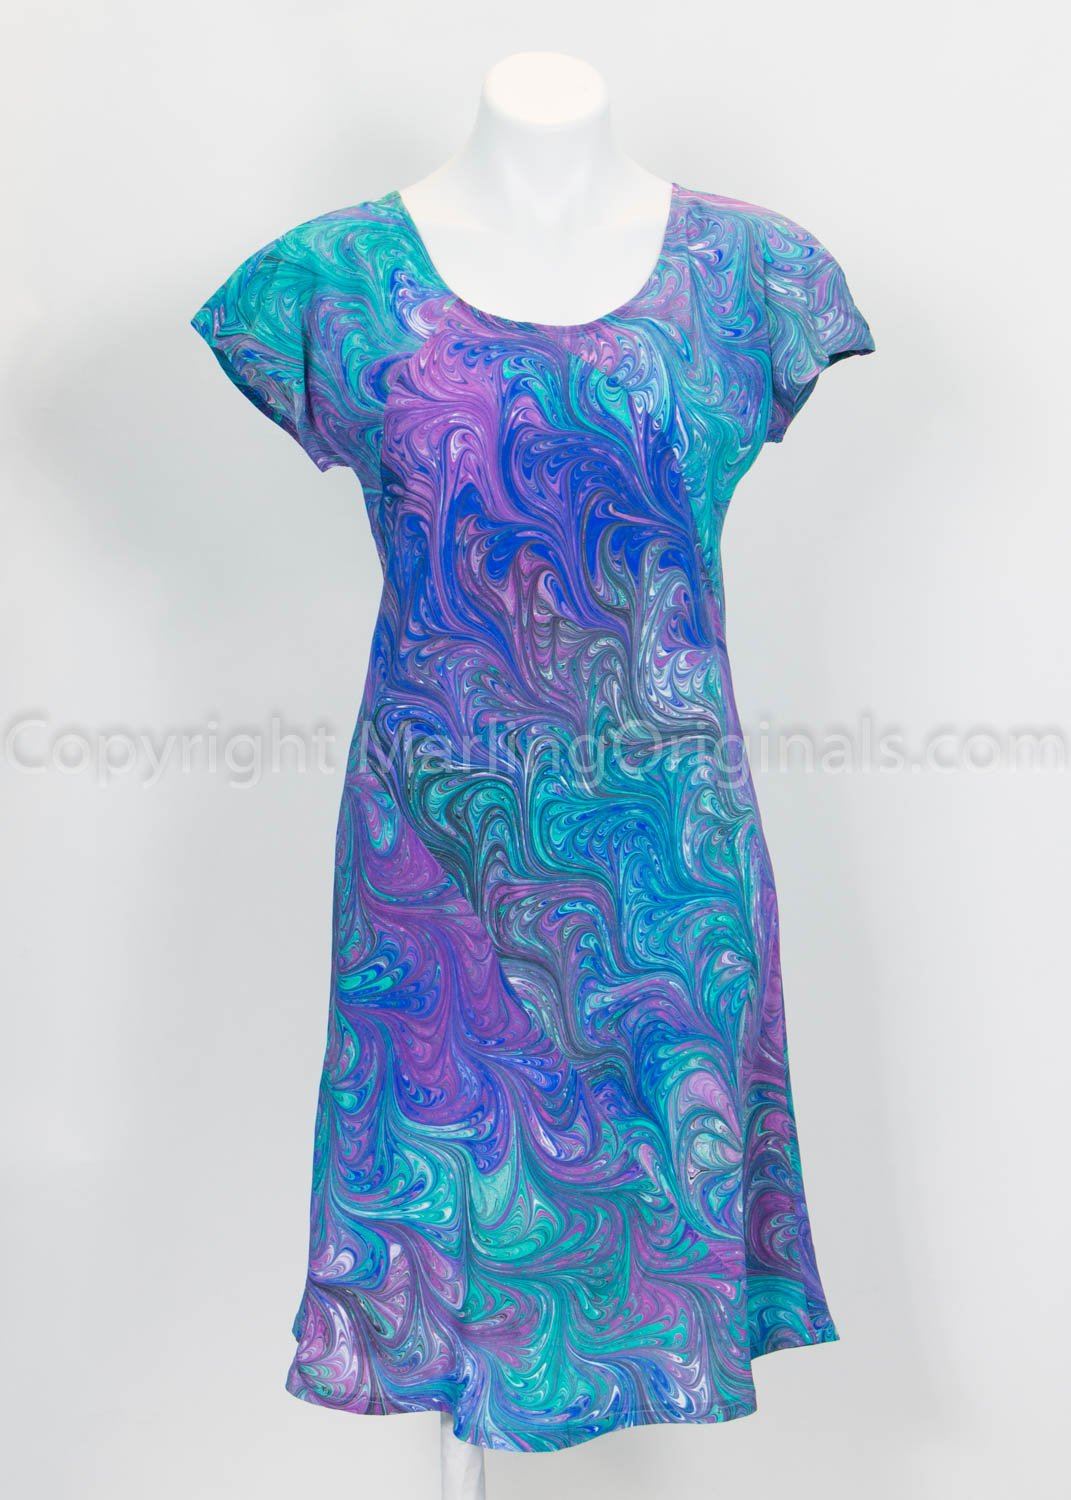 unique dress for older women with soft marbled pattern